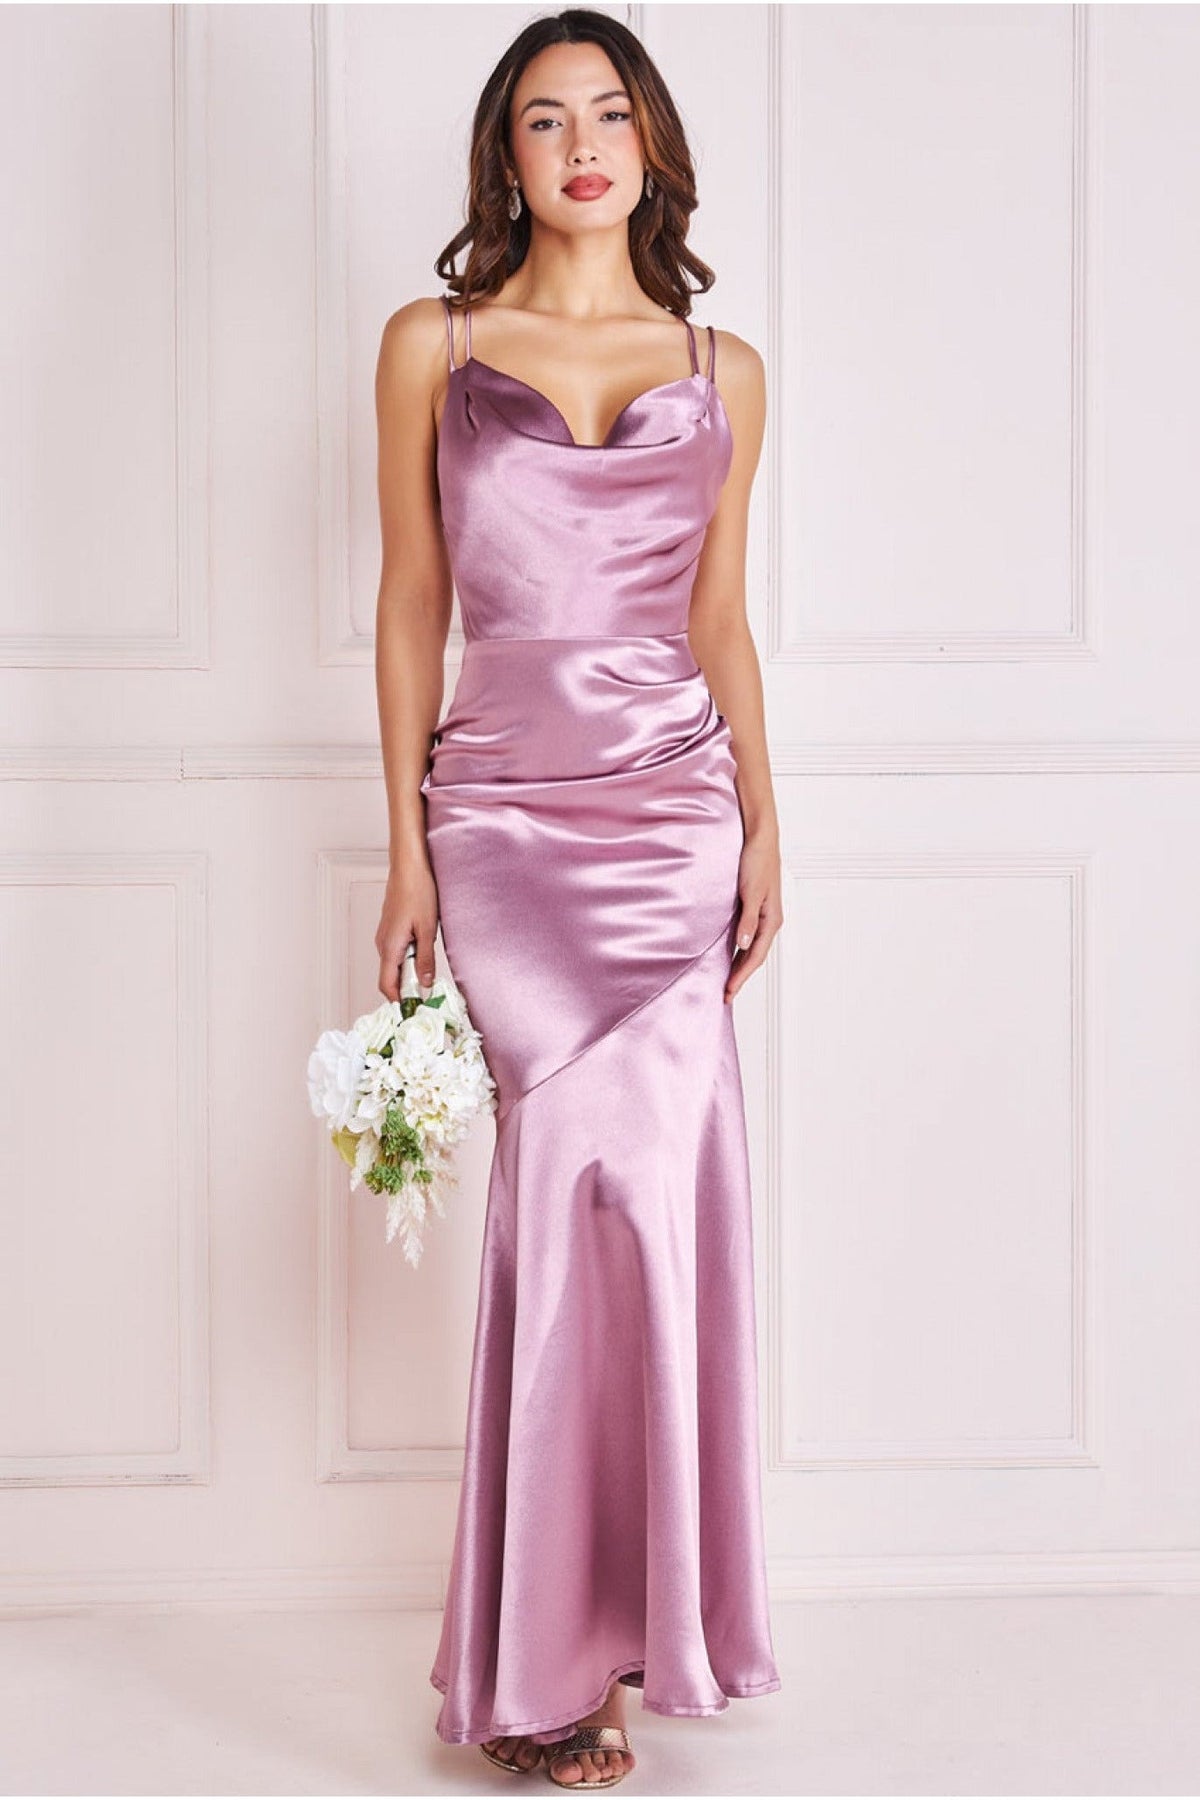 Satin Cowl Neck With Strappy Back Maxi - Pink DR2113QZ